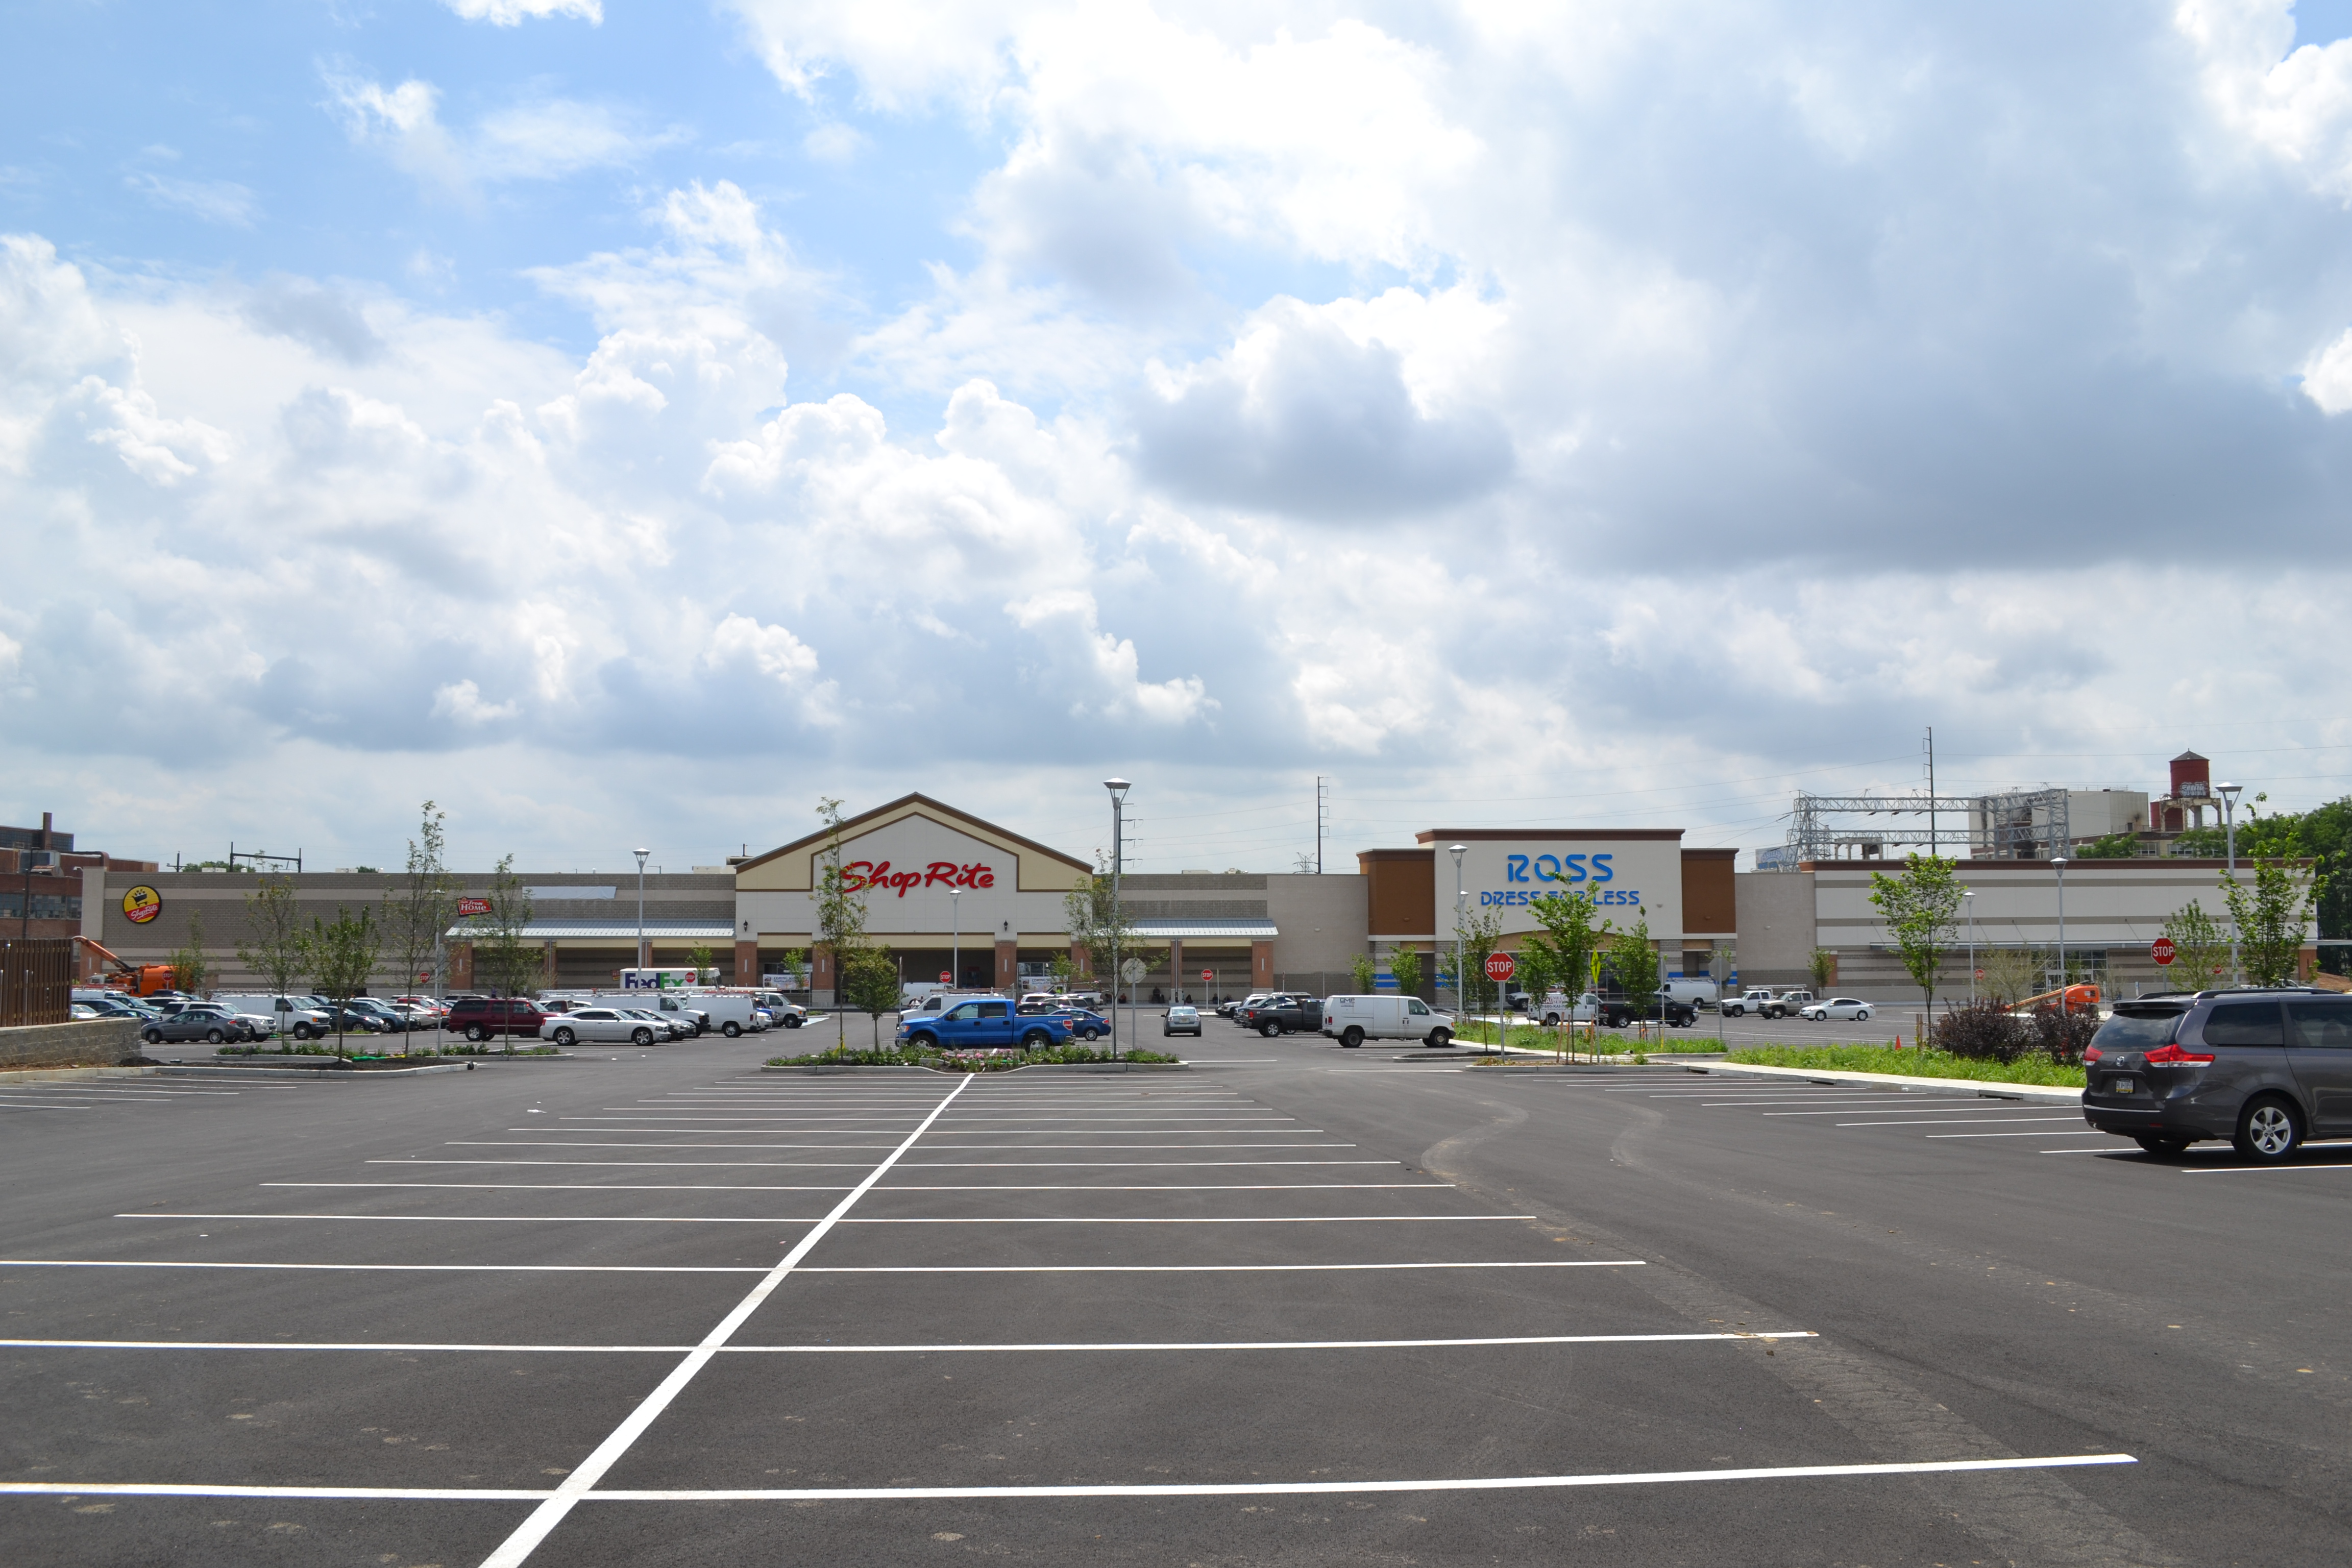 In addition to bus service, the 220,000 square-foot shopping center has ample parking